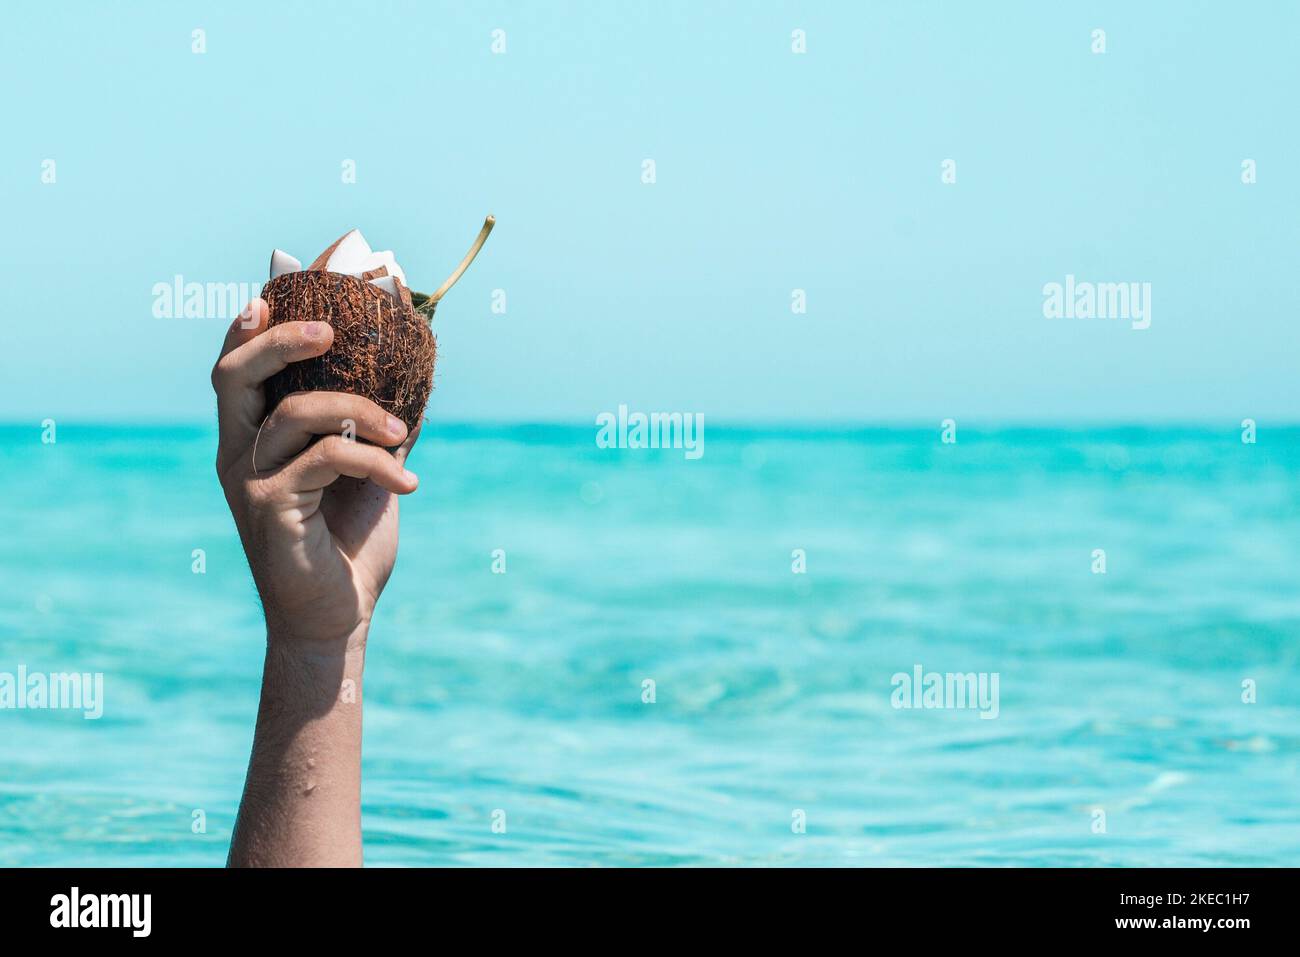 Close up of hand of an unrecognizable person holding half coconut shell with slices on coconut in it against sea and sky. Wet hand in summer with coconut shell. Raised hand holding coconut against sea Stock Photo